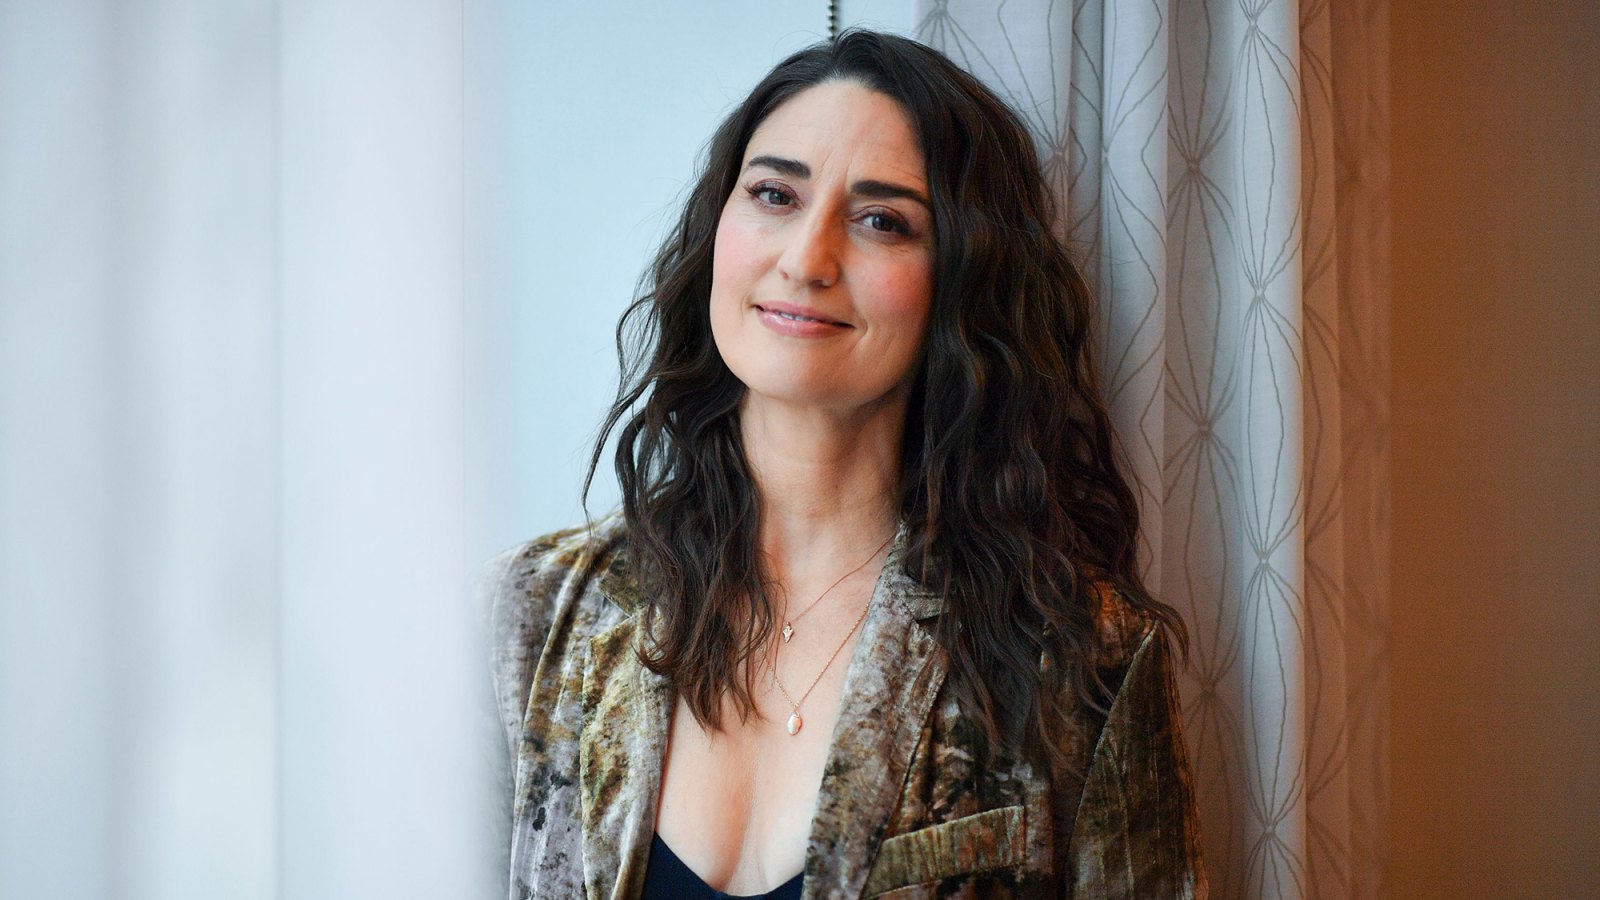 Sara Bareilles Gets Real About Combatting Body Image Struggles While Choosing Her Tony Awards Outfit